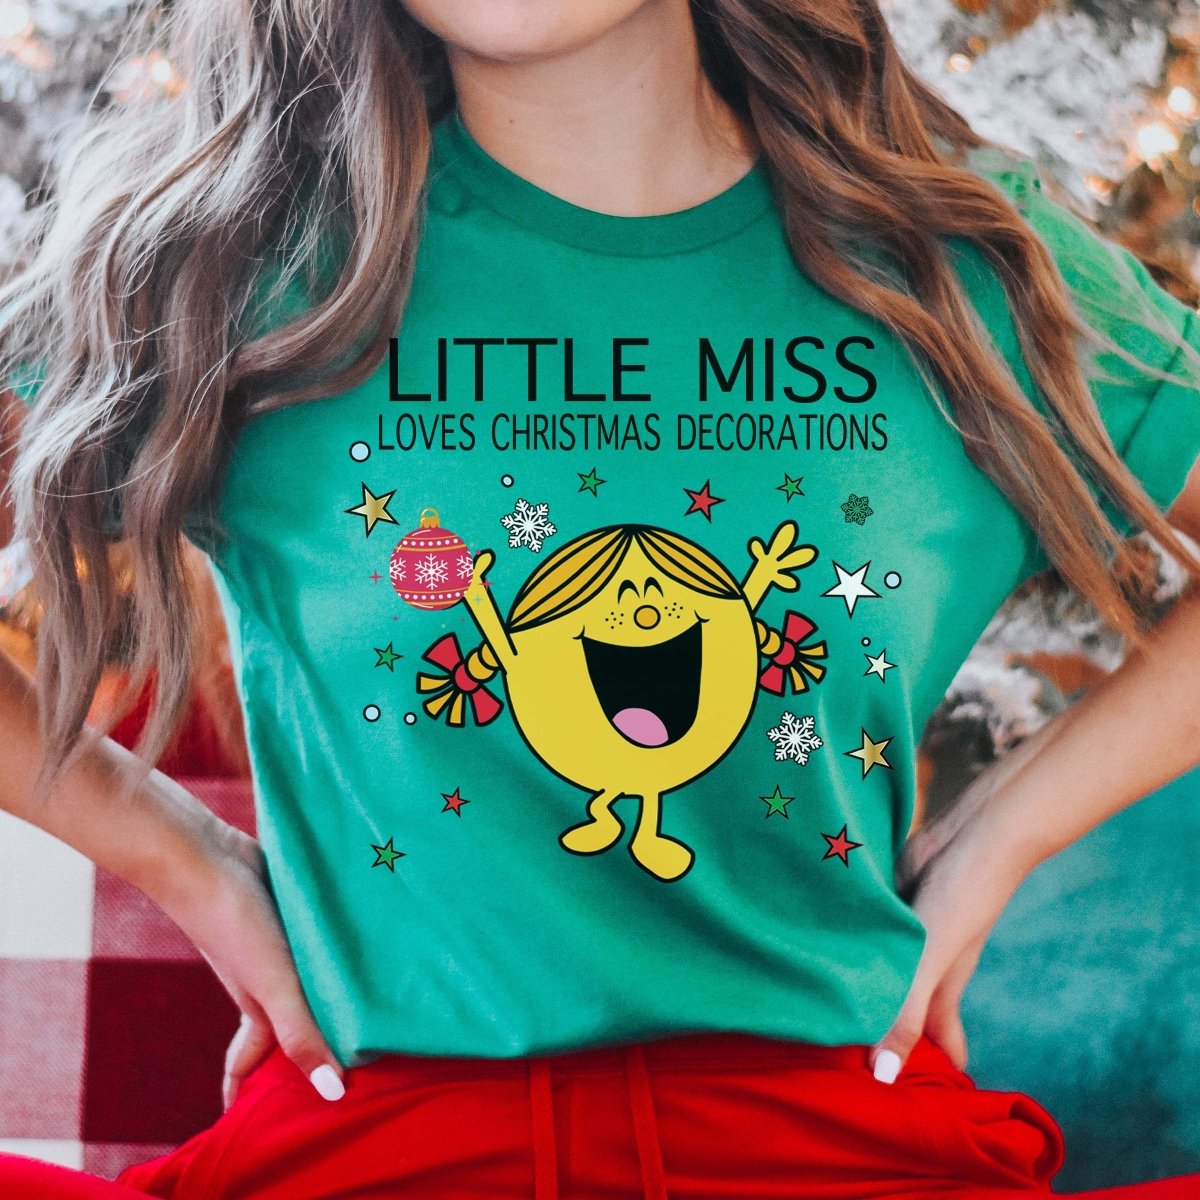 Little Miss Loves Christmas Decorations Wholesale Tee Design #21 - Limeberry Designs